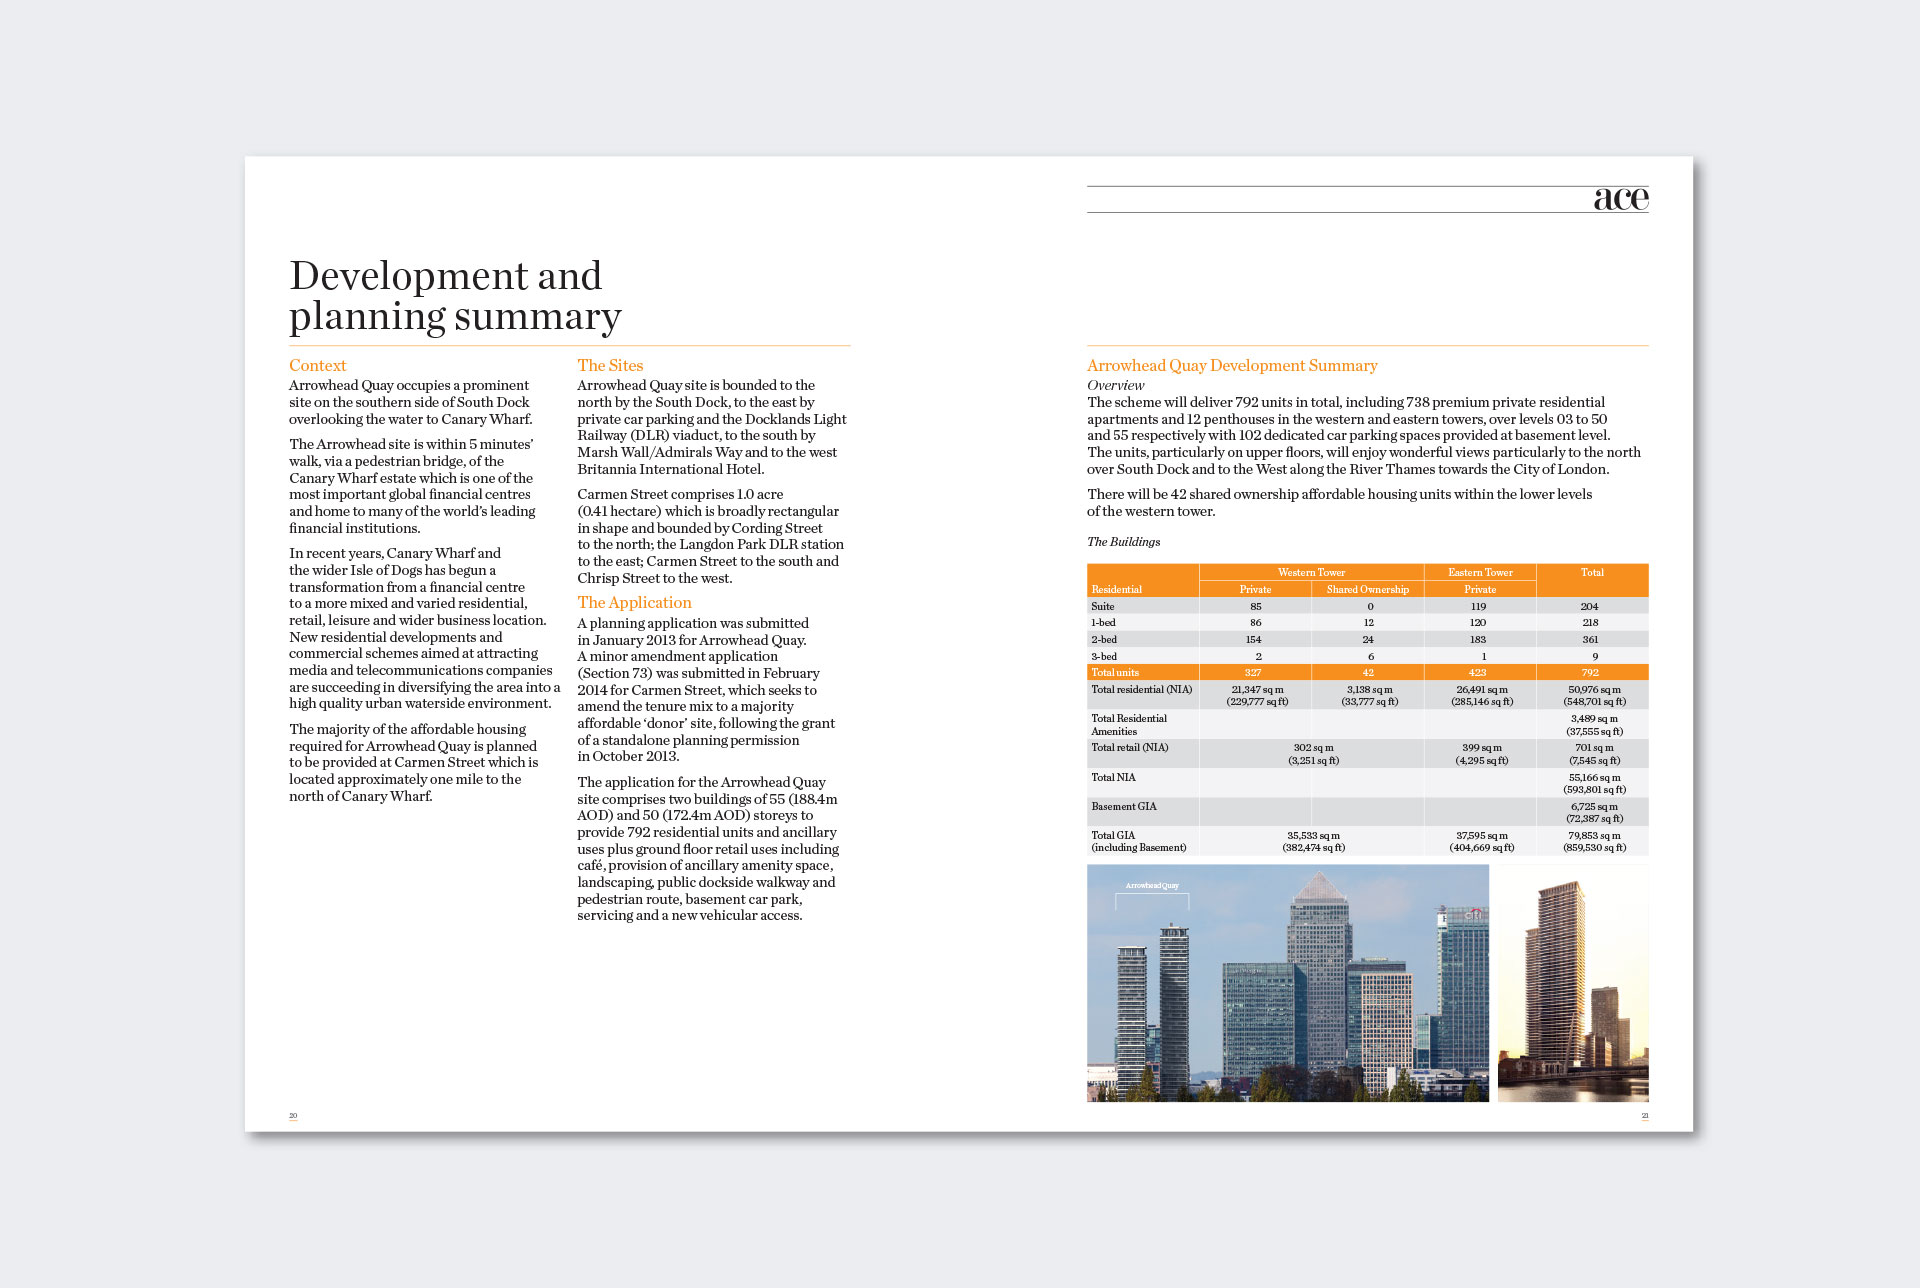 ace-investment-document-development-pages.jpg